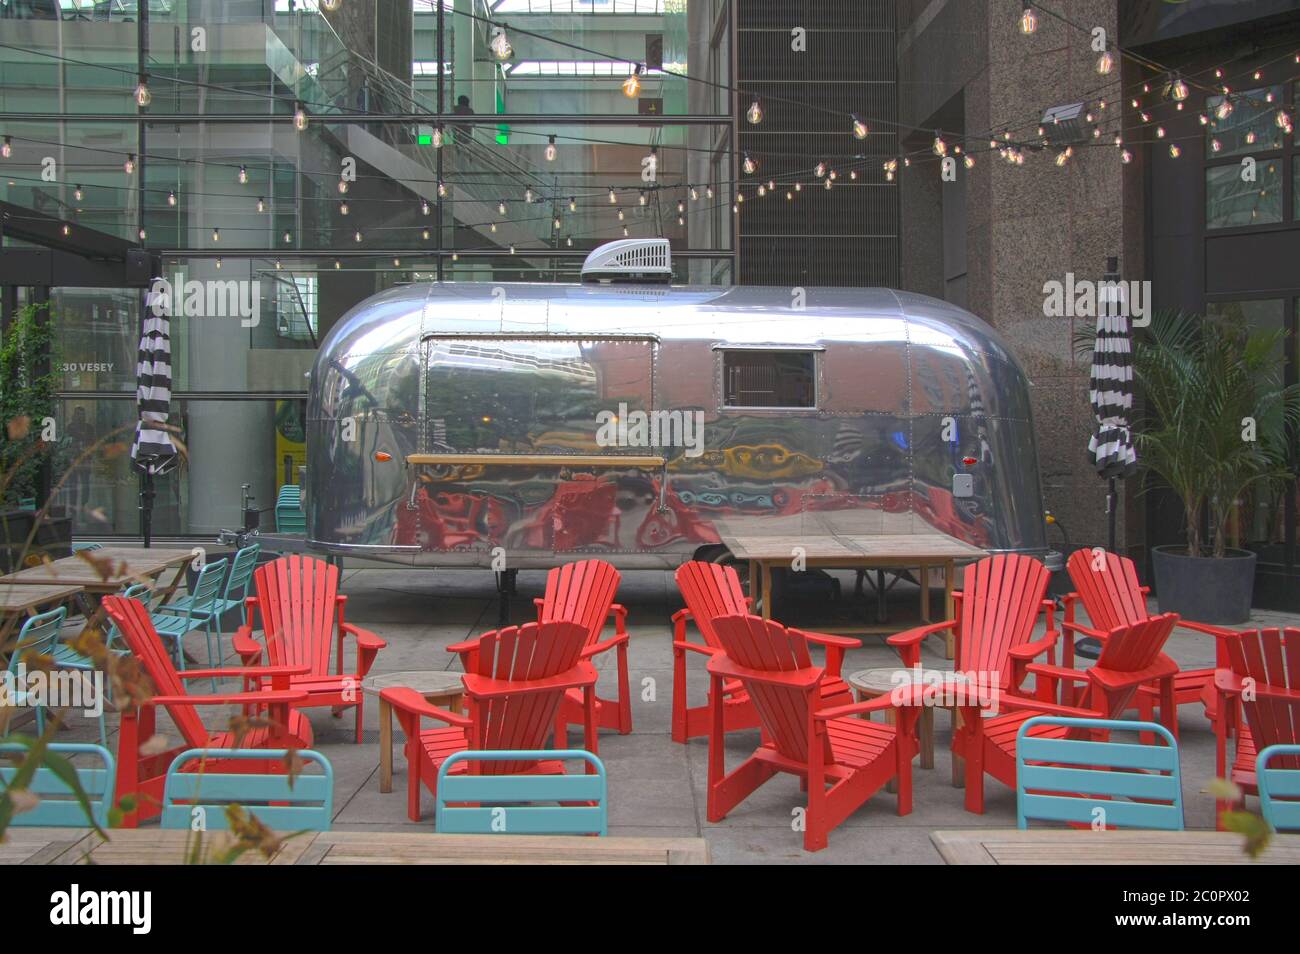 New York City Airstream Metallic caravan cafe business with outdoor seating in front of a glazed facade building in the big apple Stock Photo